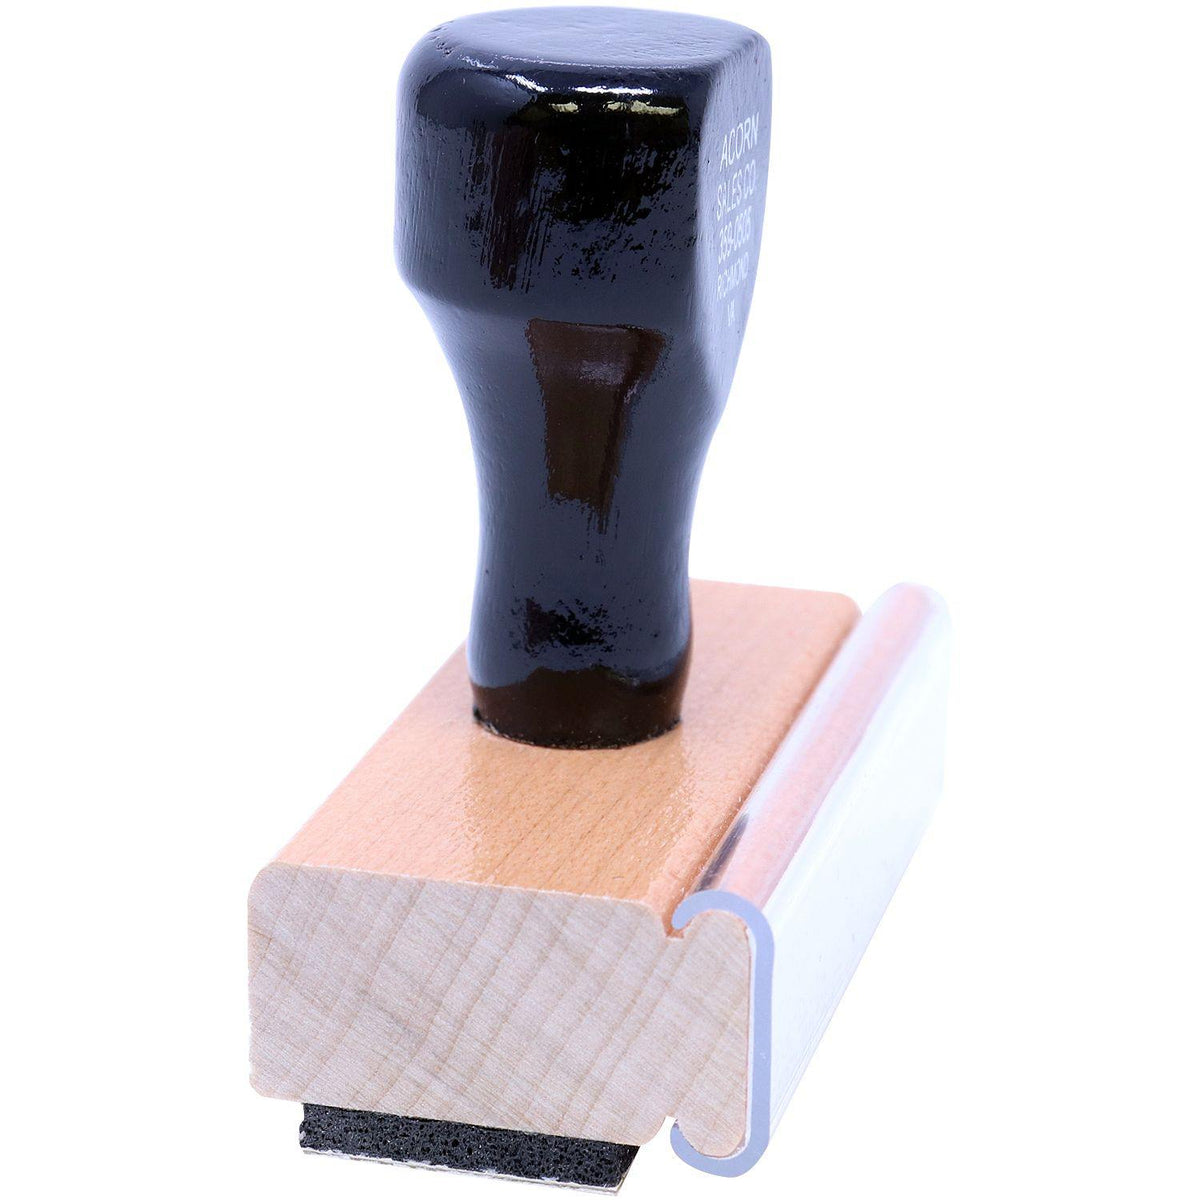 Side View of Large Redo In Pencil And Turn Back In Teacher Rubber Stamp at an Angle